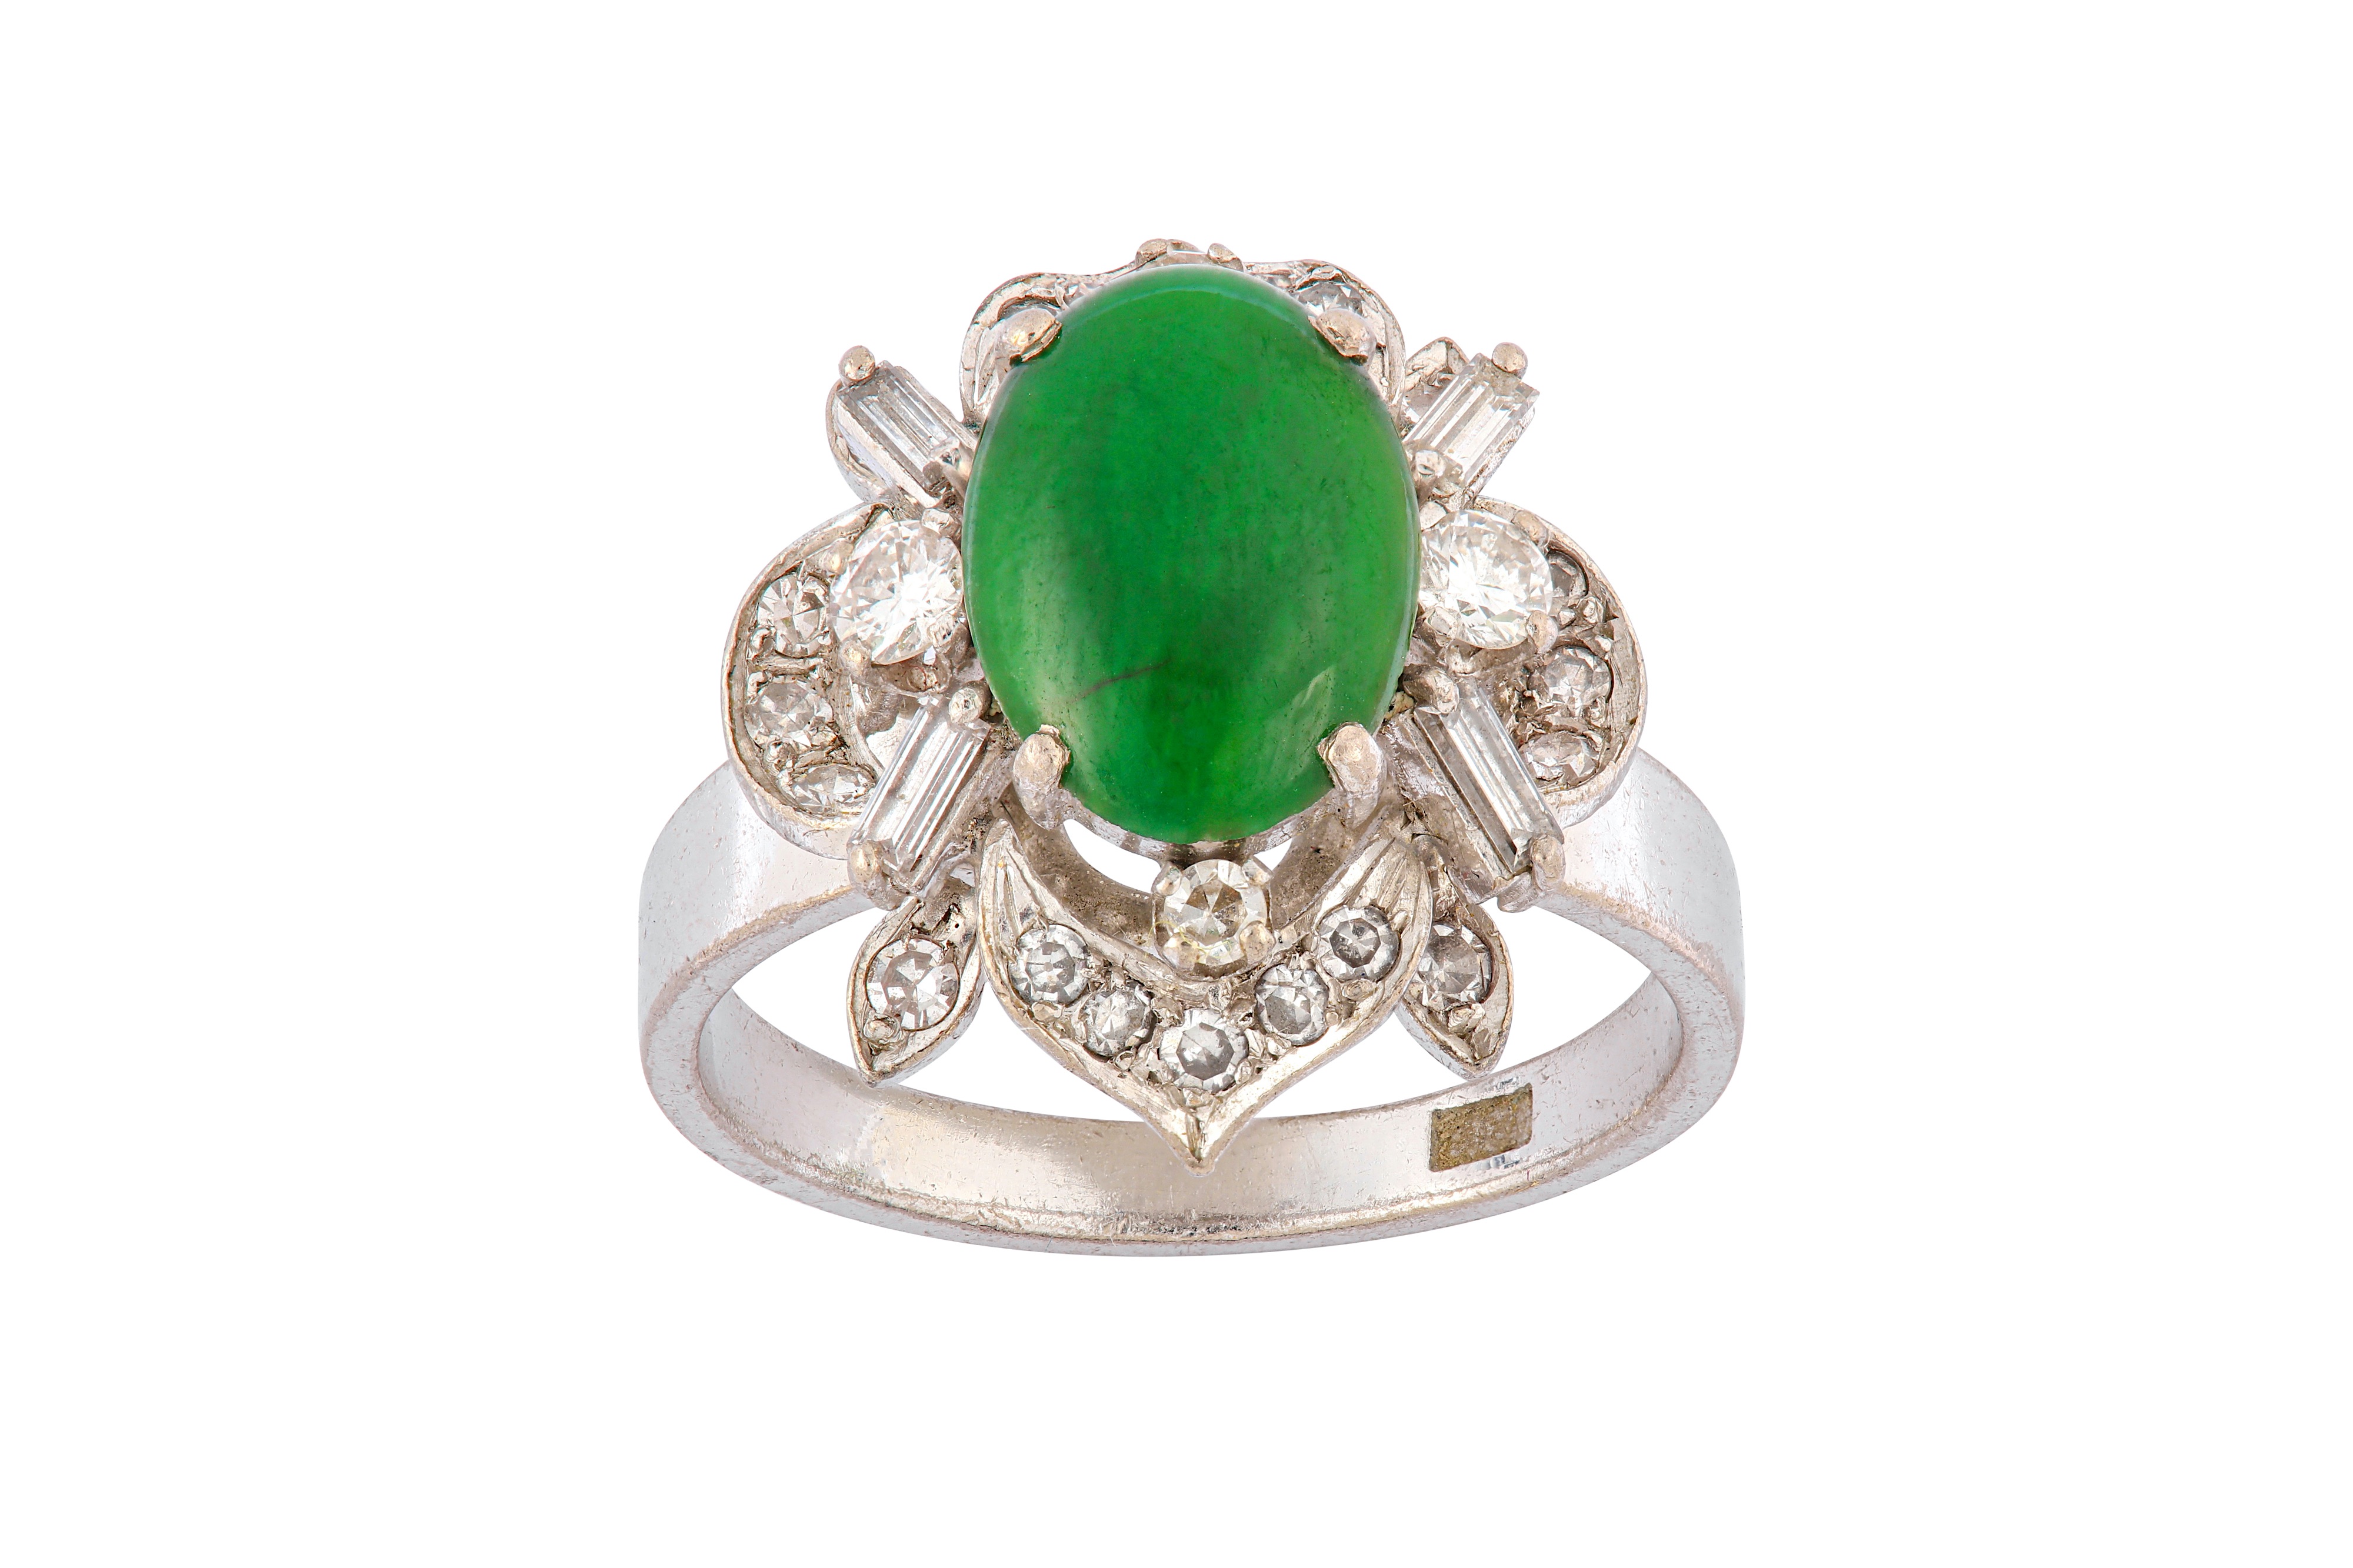 A jade and diamond ring - Image 2 of 5